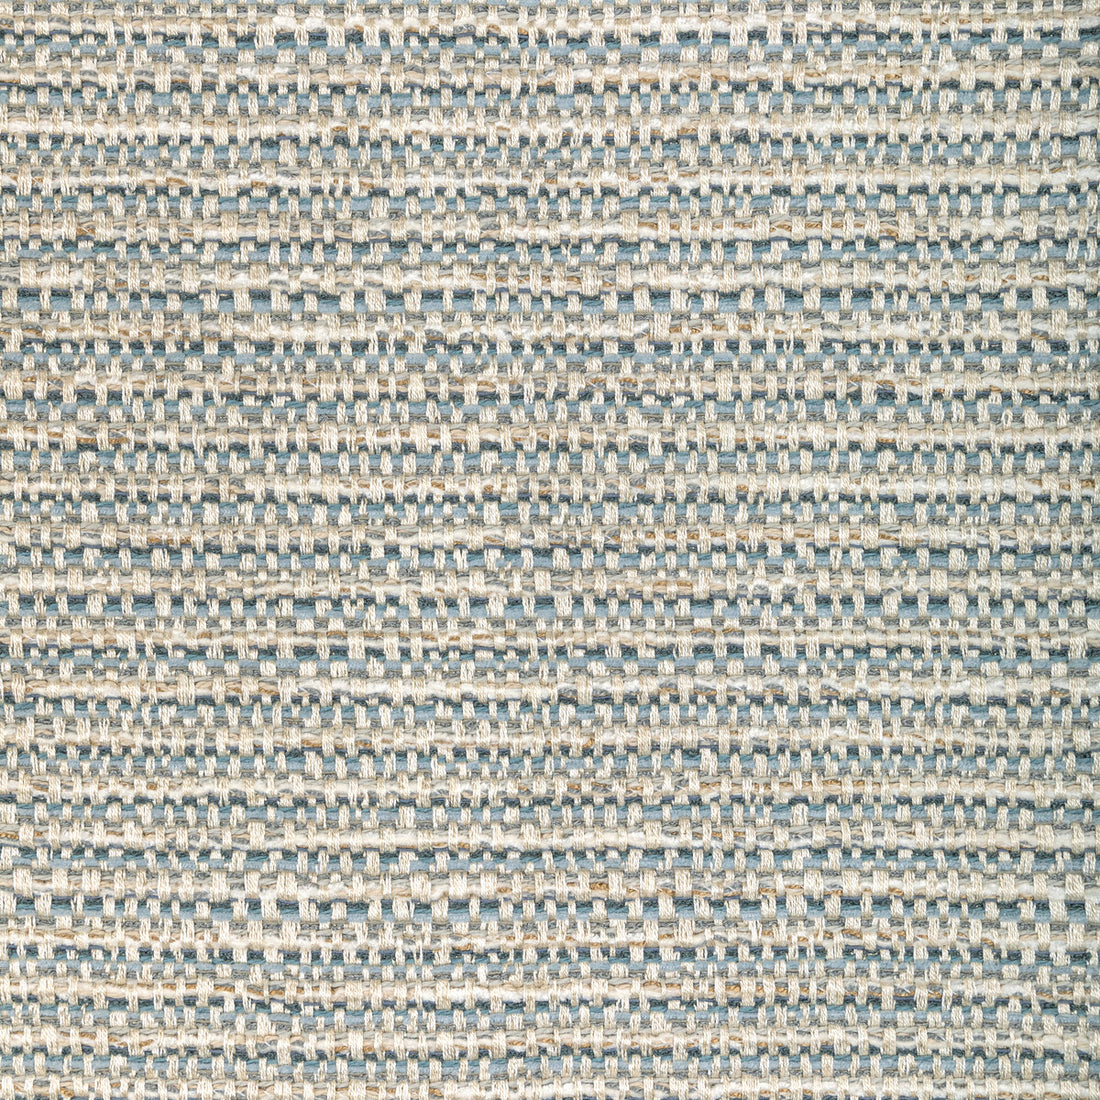 Kravet Design fabric in 36417-1511 color - pattern 36417.1511.0 - by Kravet Design in the Performance Crypton Home collection